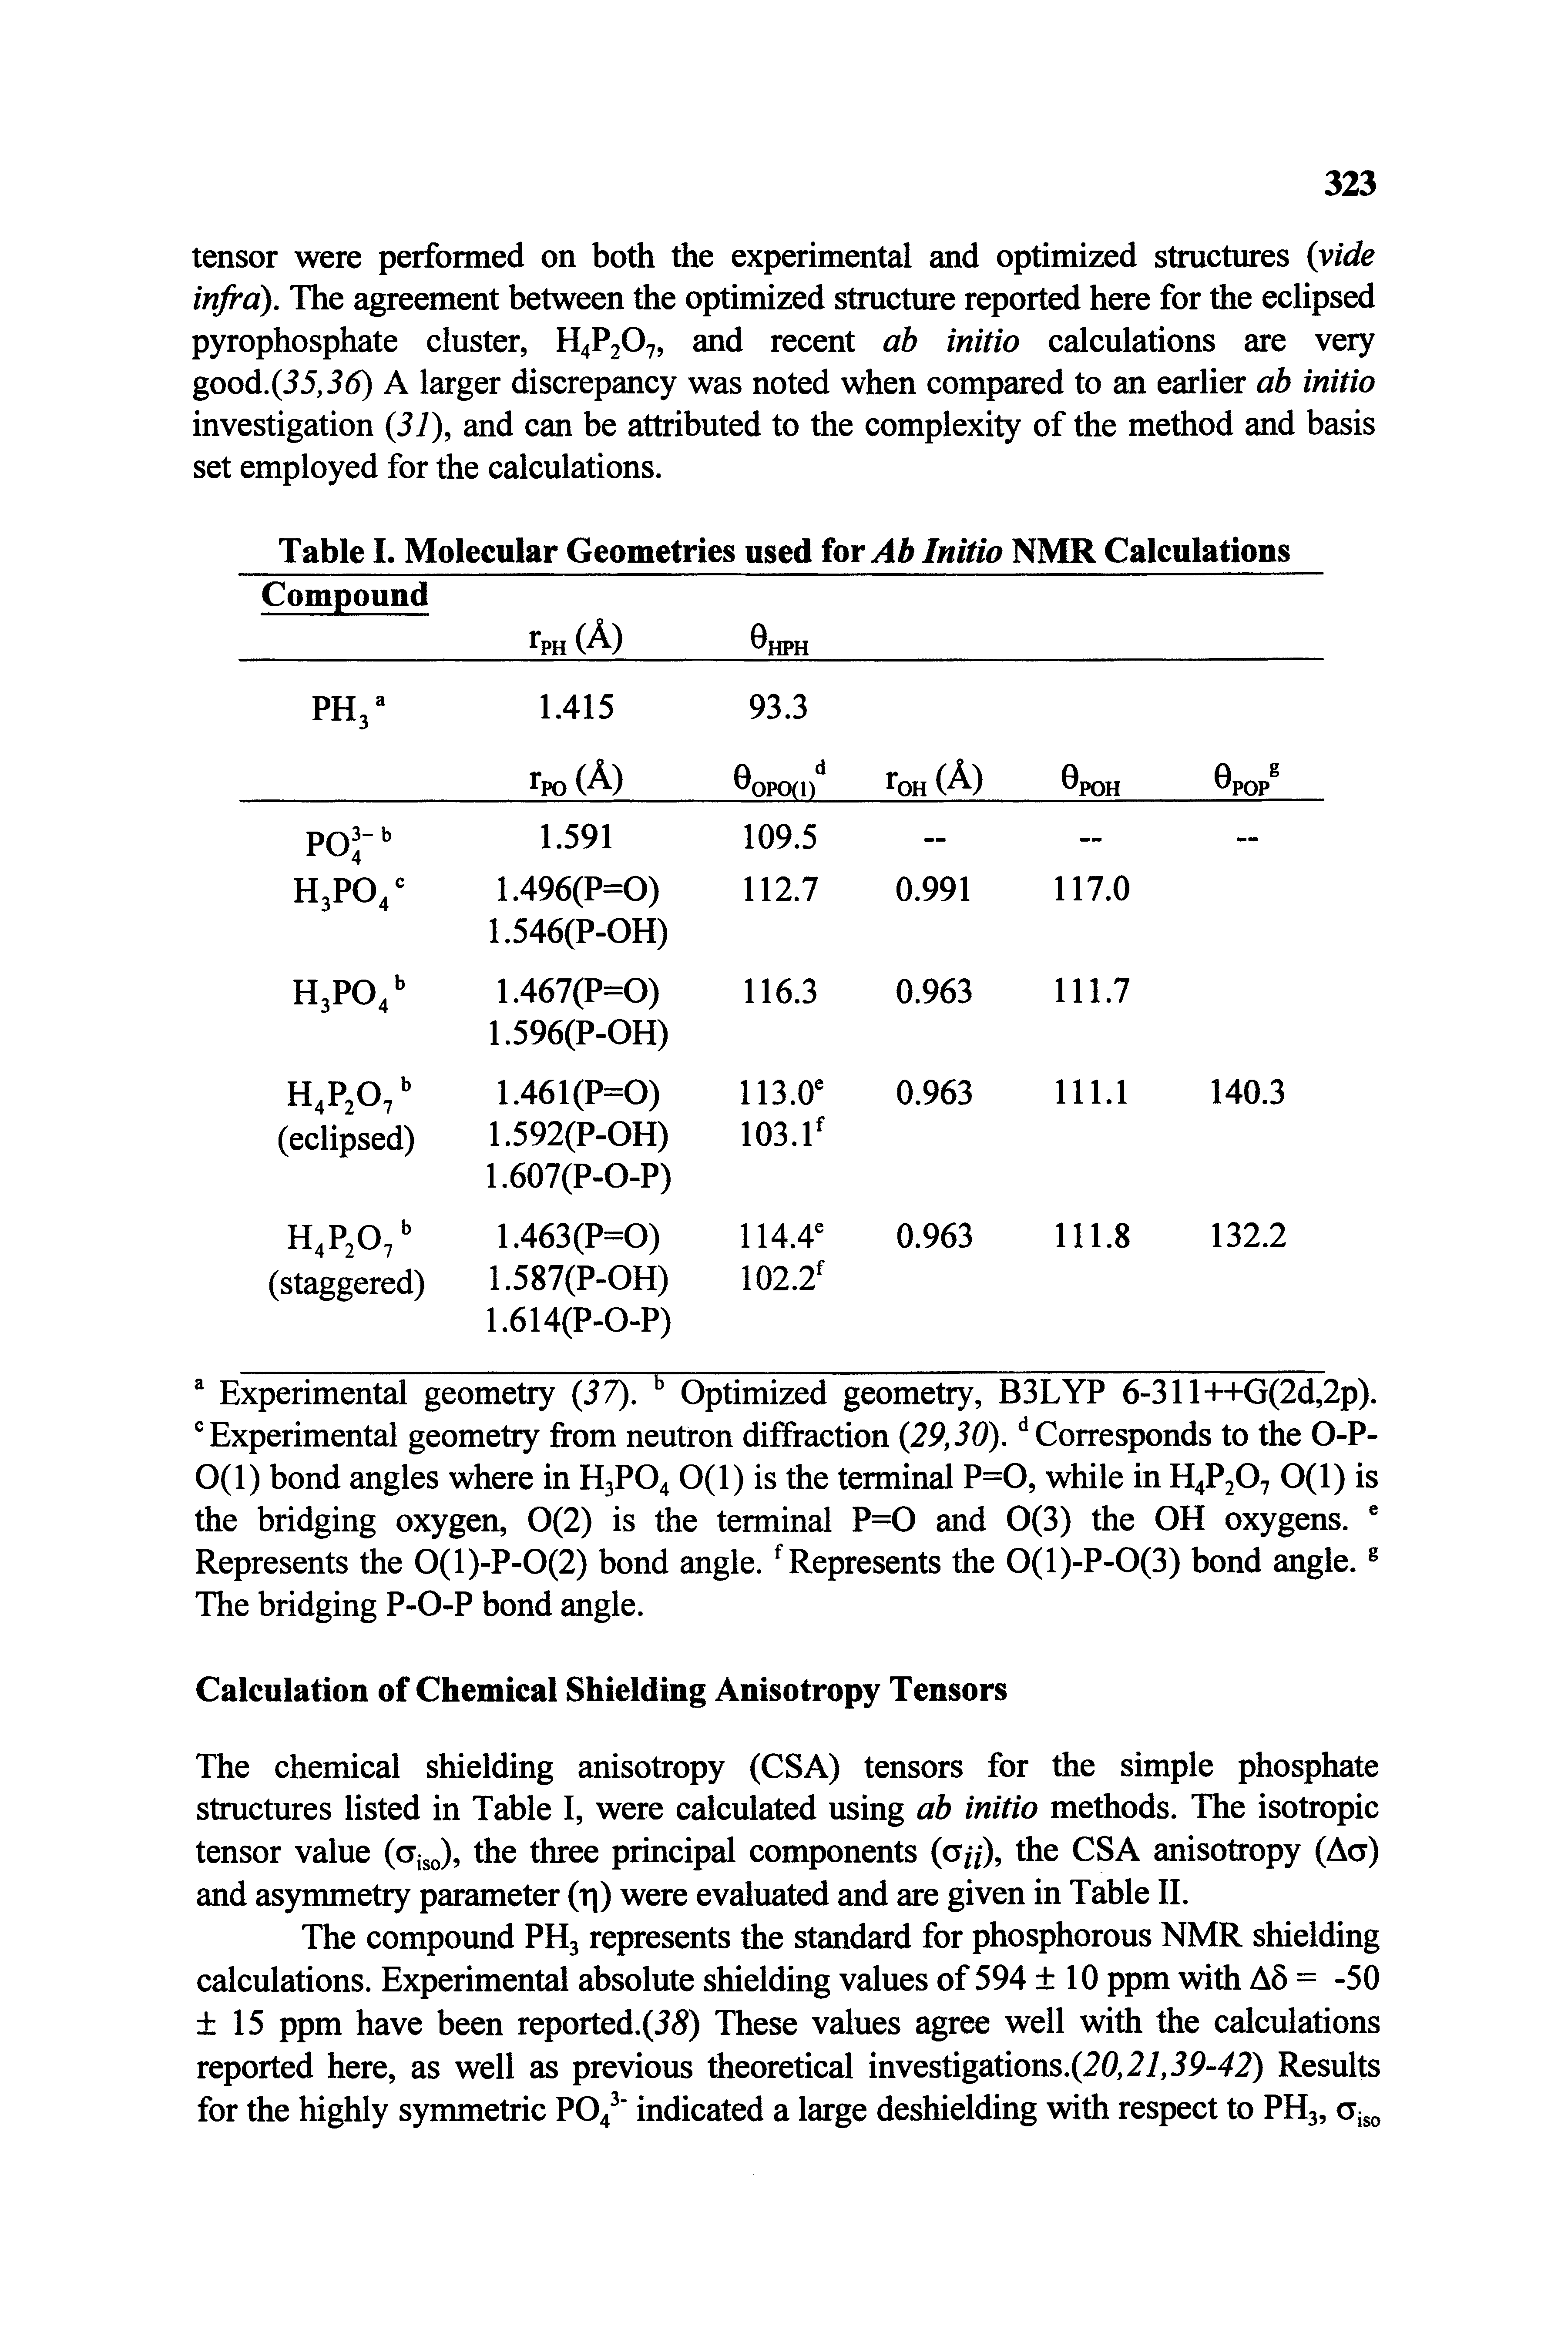 Table I. Molecular Geometries used for Ab Initio NMR Calculations...